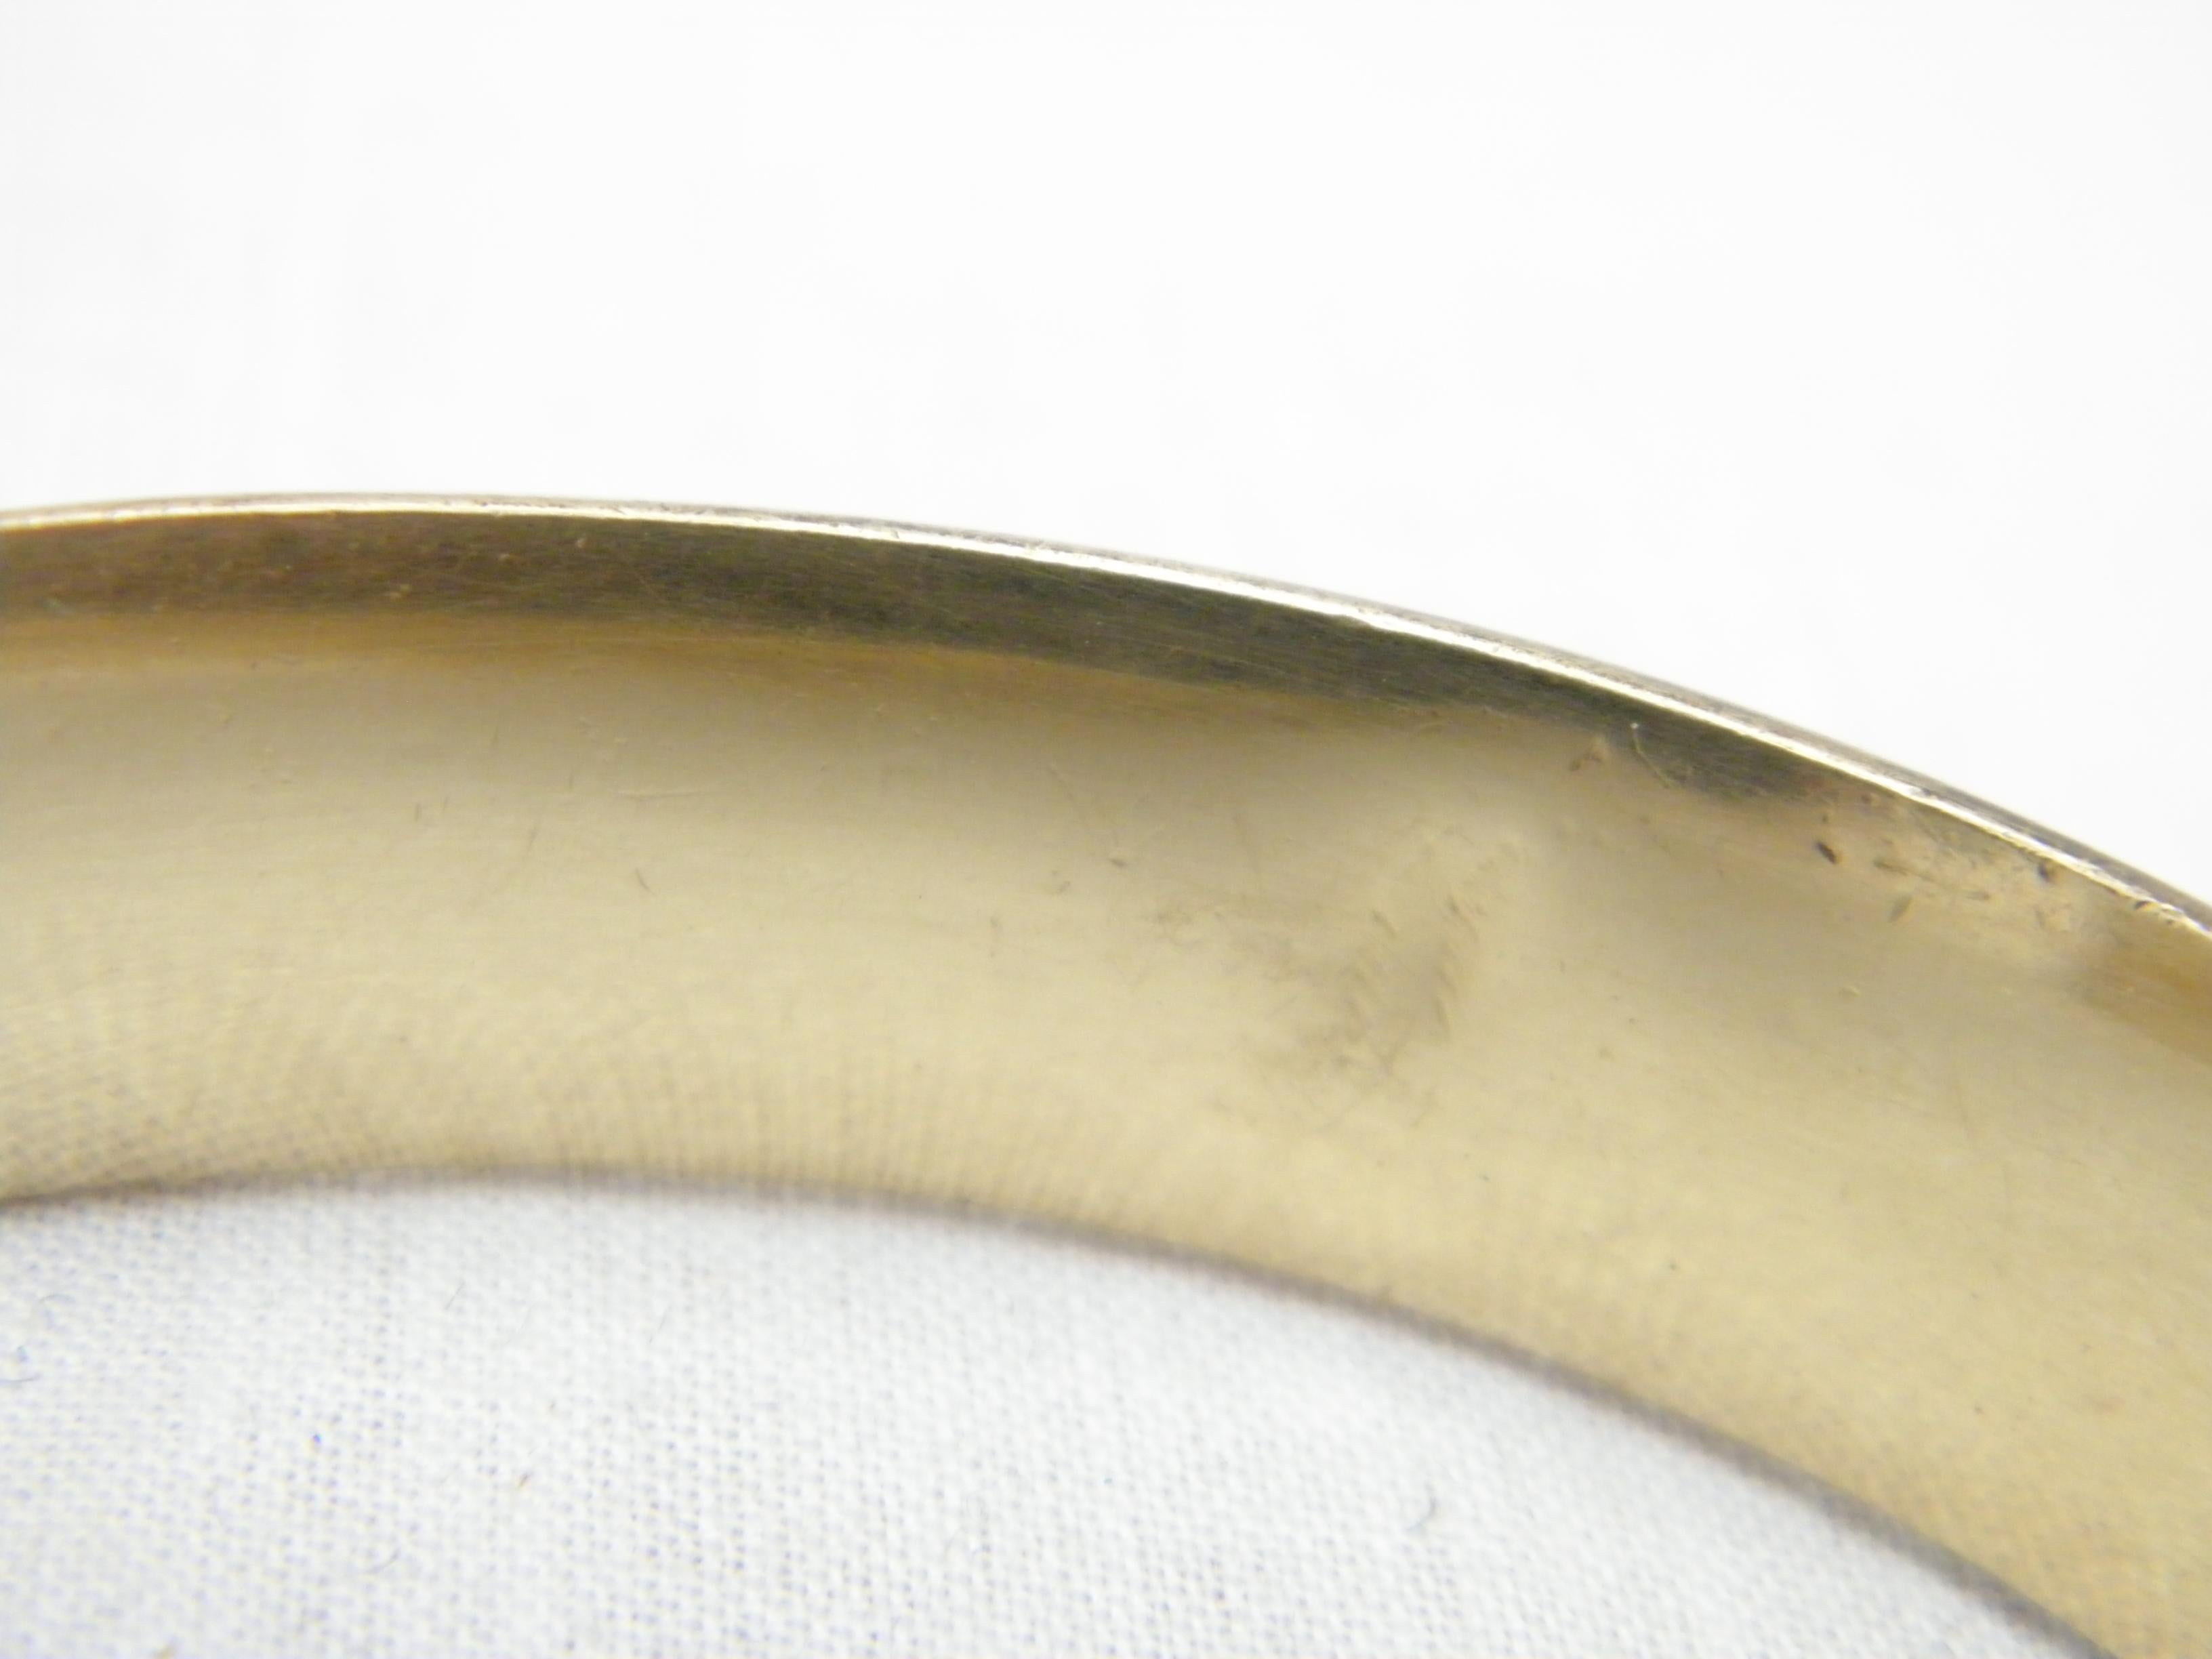 Bargain 9ct Gold 'Metal Cored' Floral Engraved Cuff Hinged Bracelet Bangle 375 For Sale 1